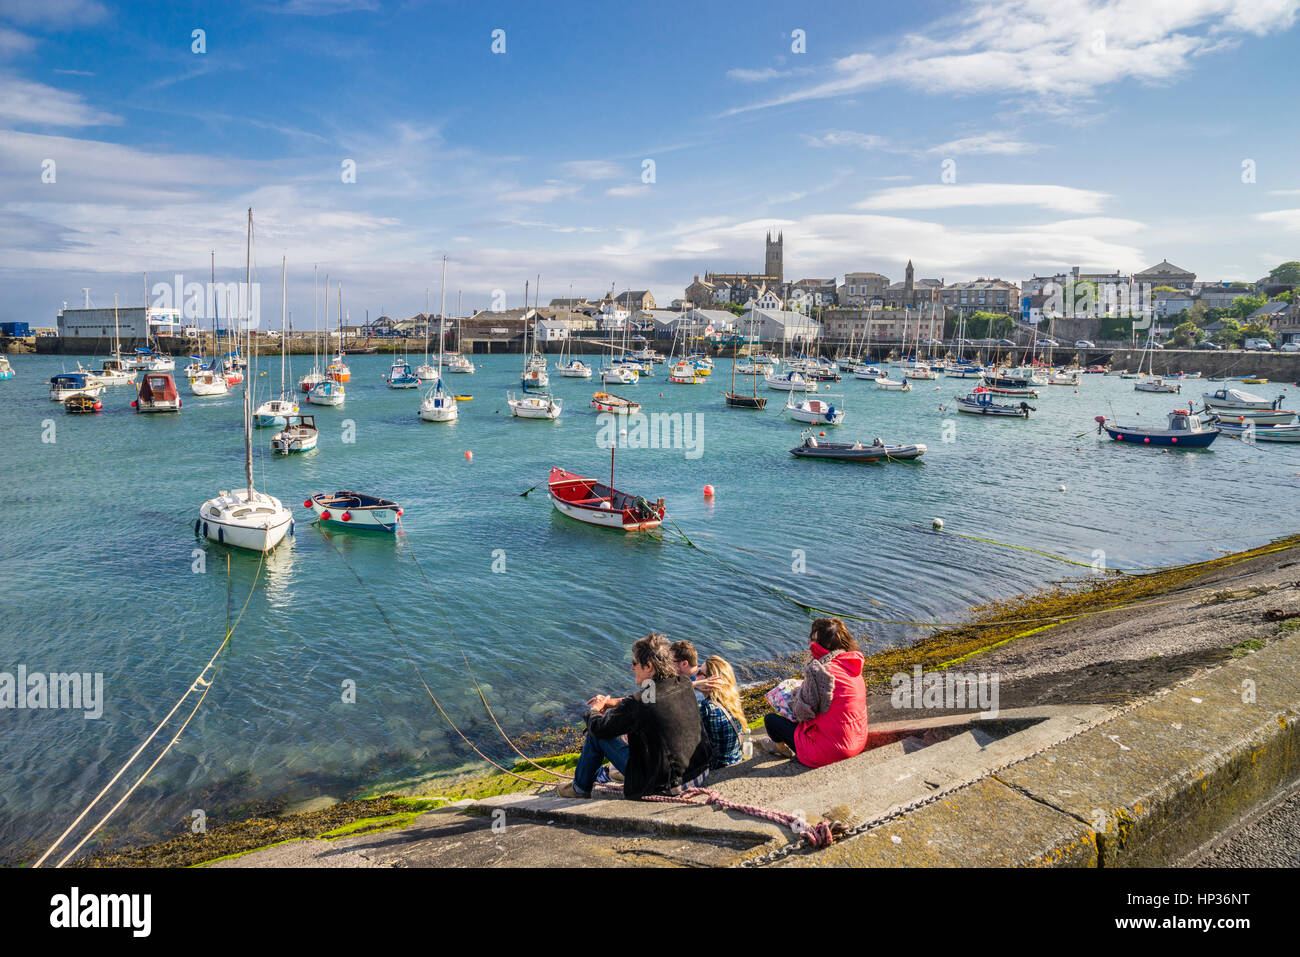 United Kingdom, South West England, Cornwall, view of Penzance harbour and town Stock Photo